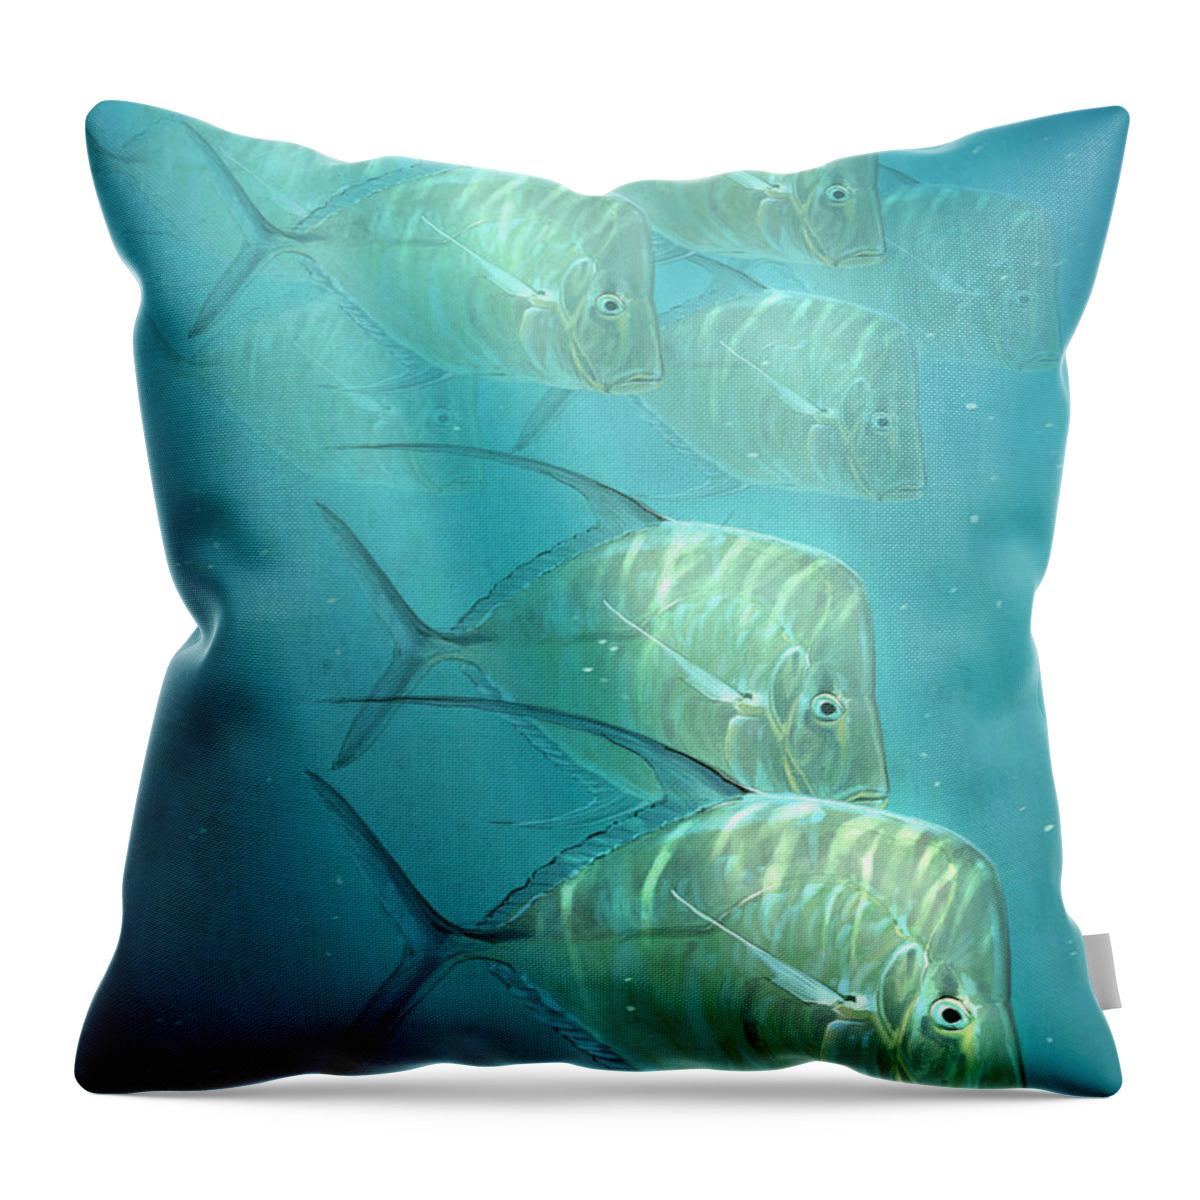 Fish Throw Pillow featuring the digital art Lookdowns by Aaron Blaise